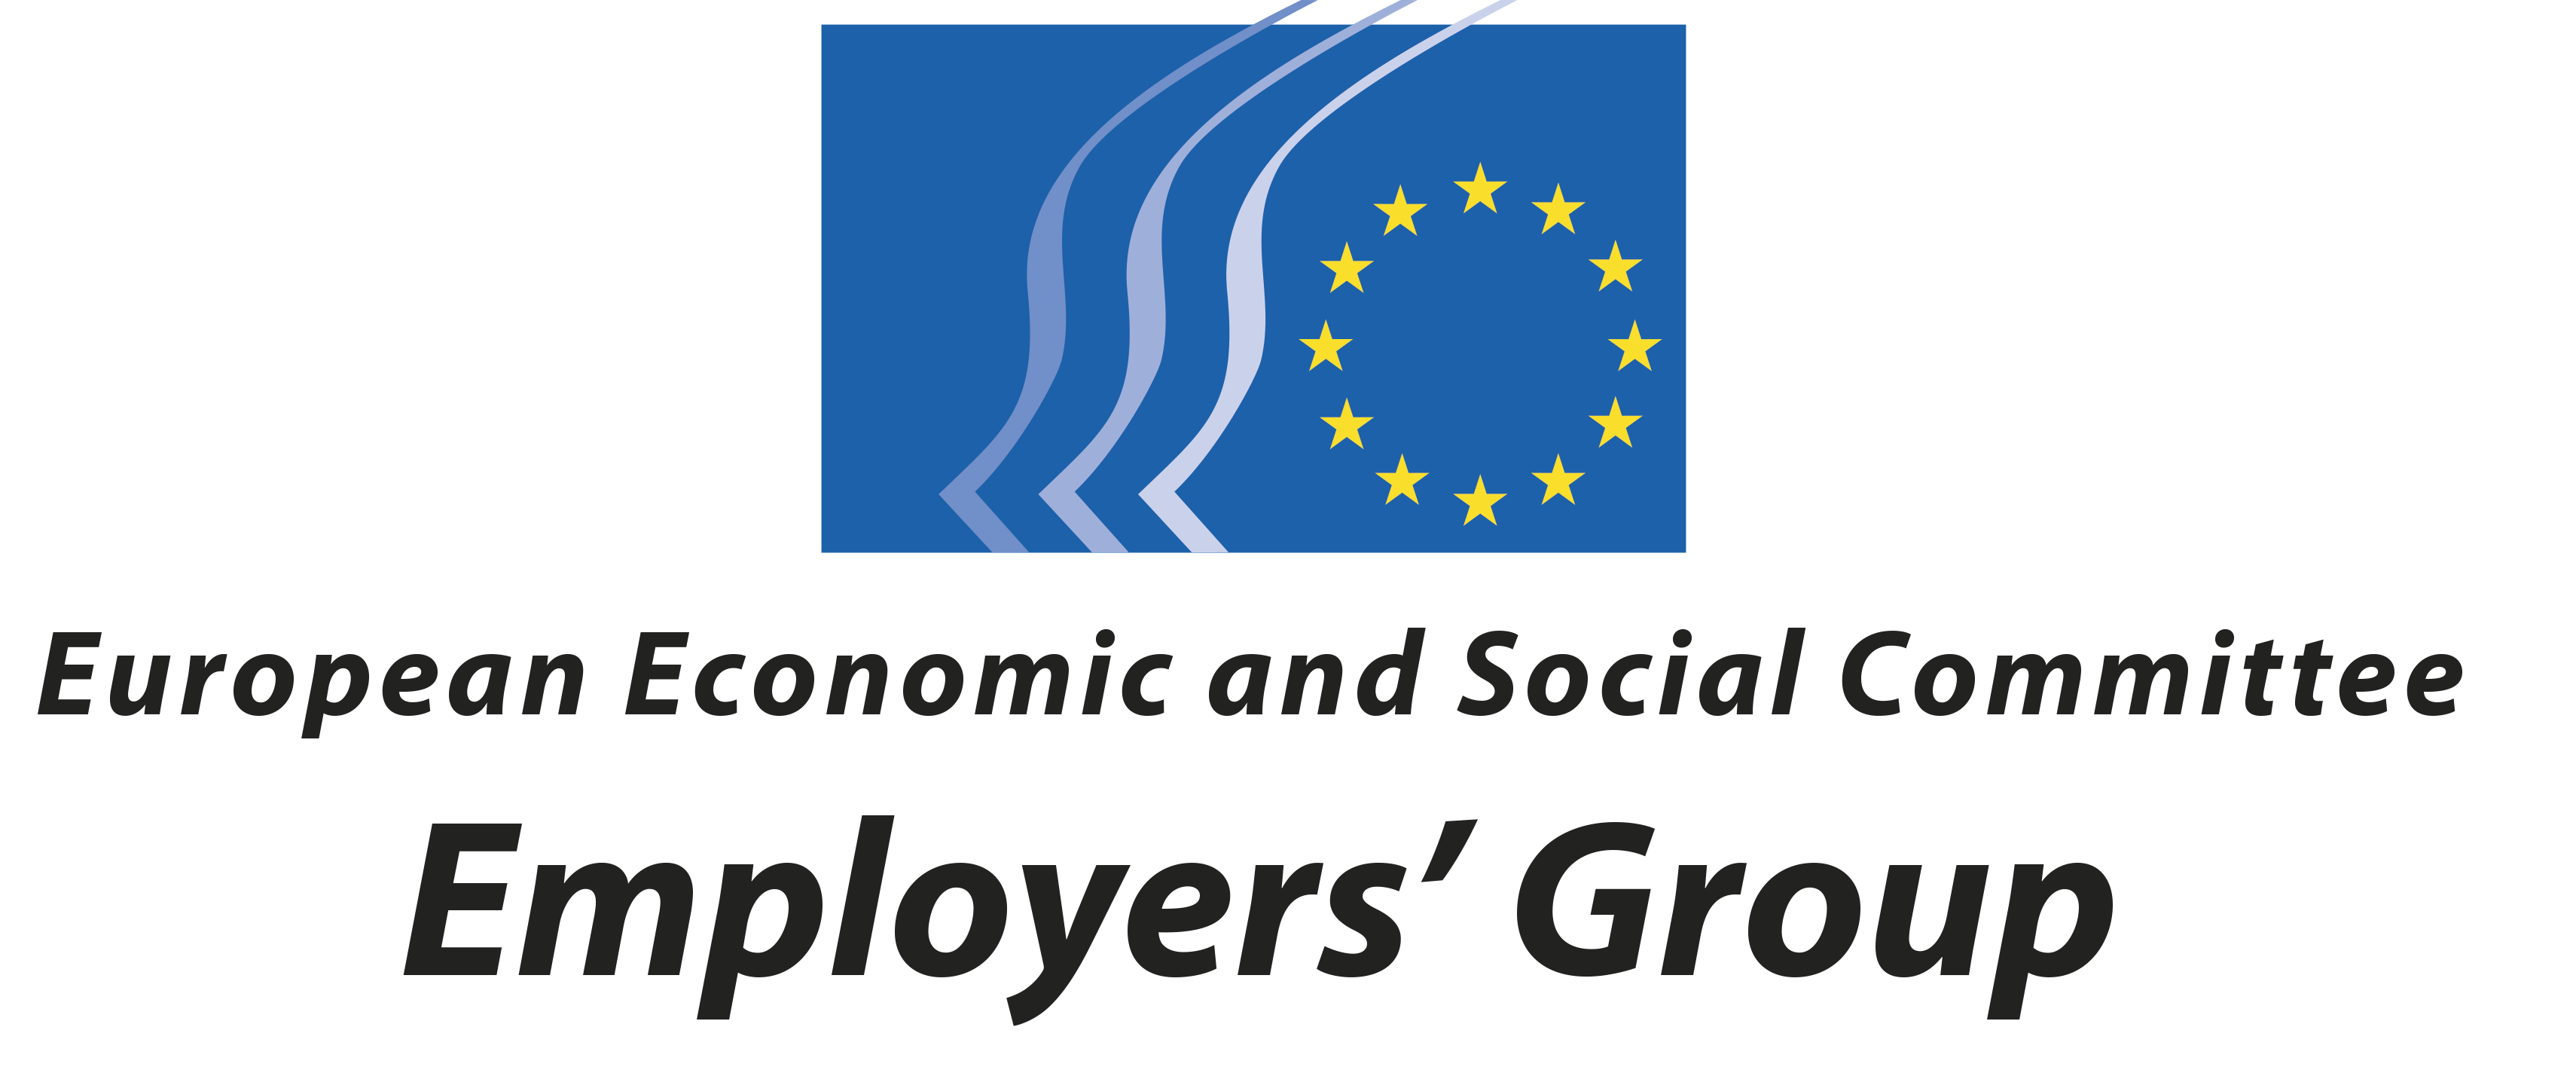 Social Committee Logo - Programme | European Economic and Social Committee